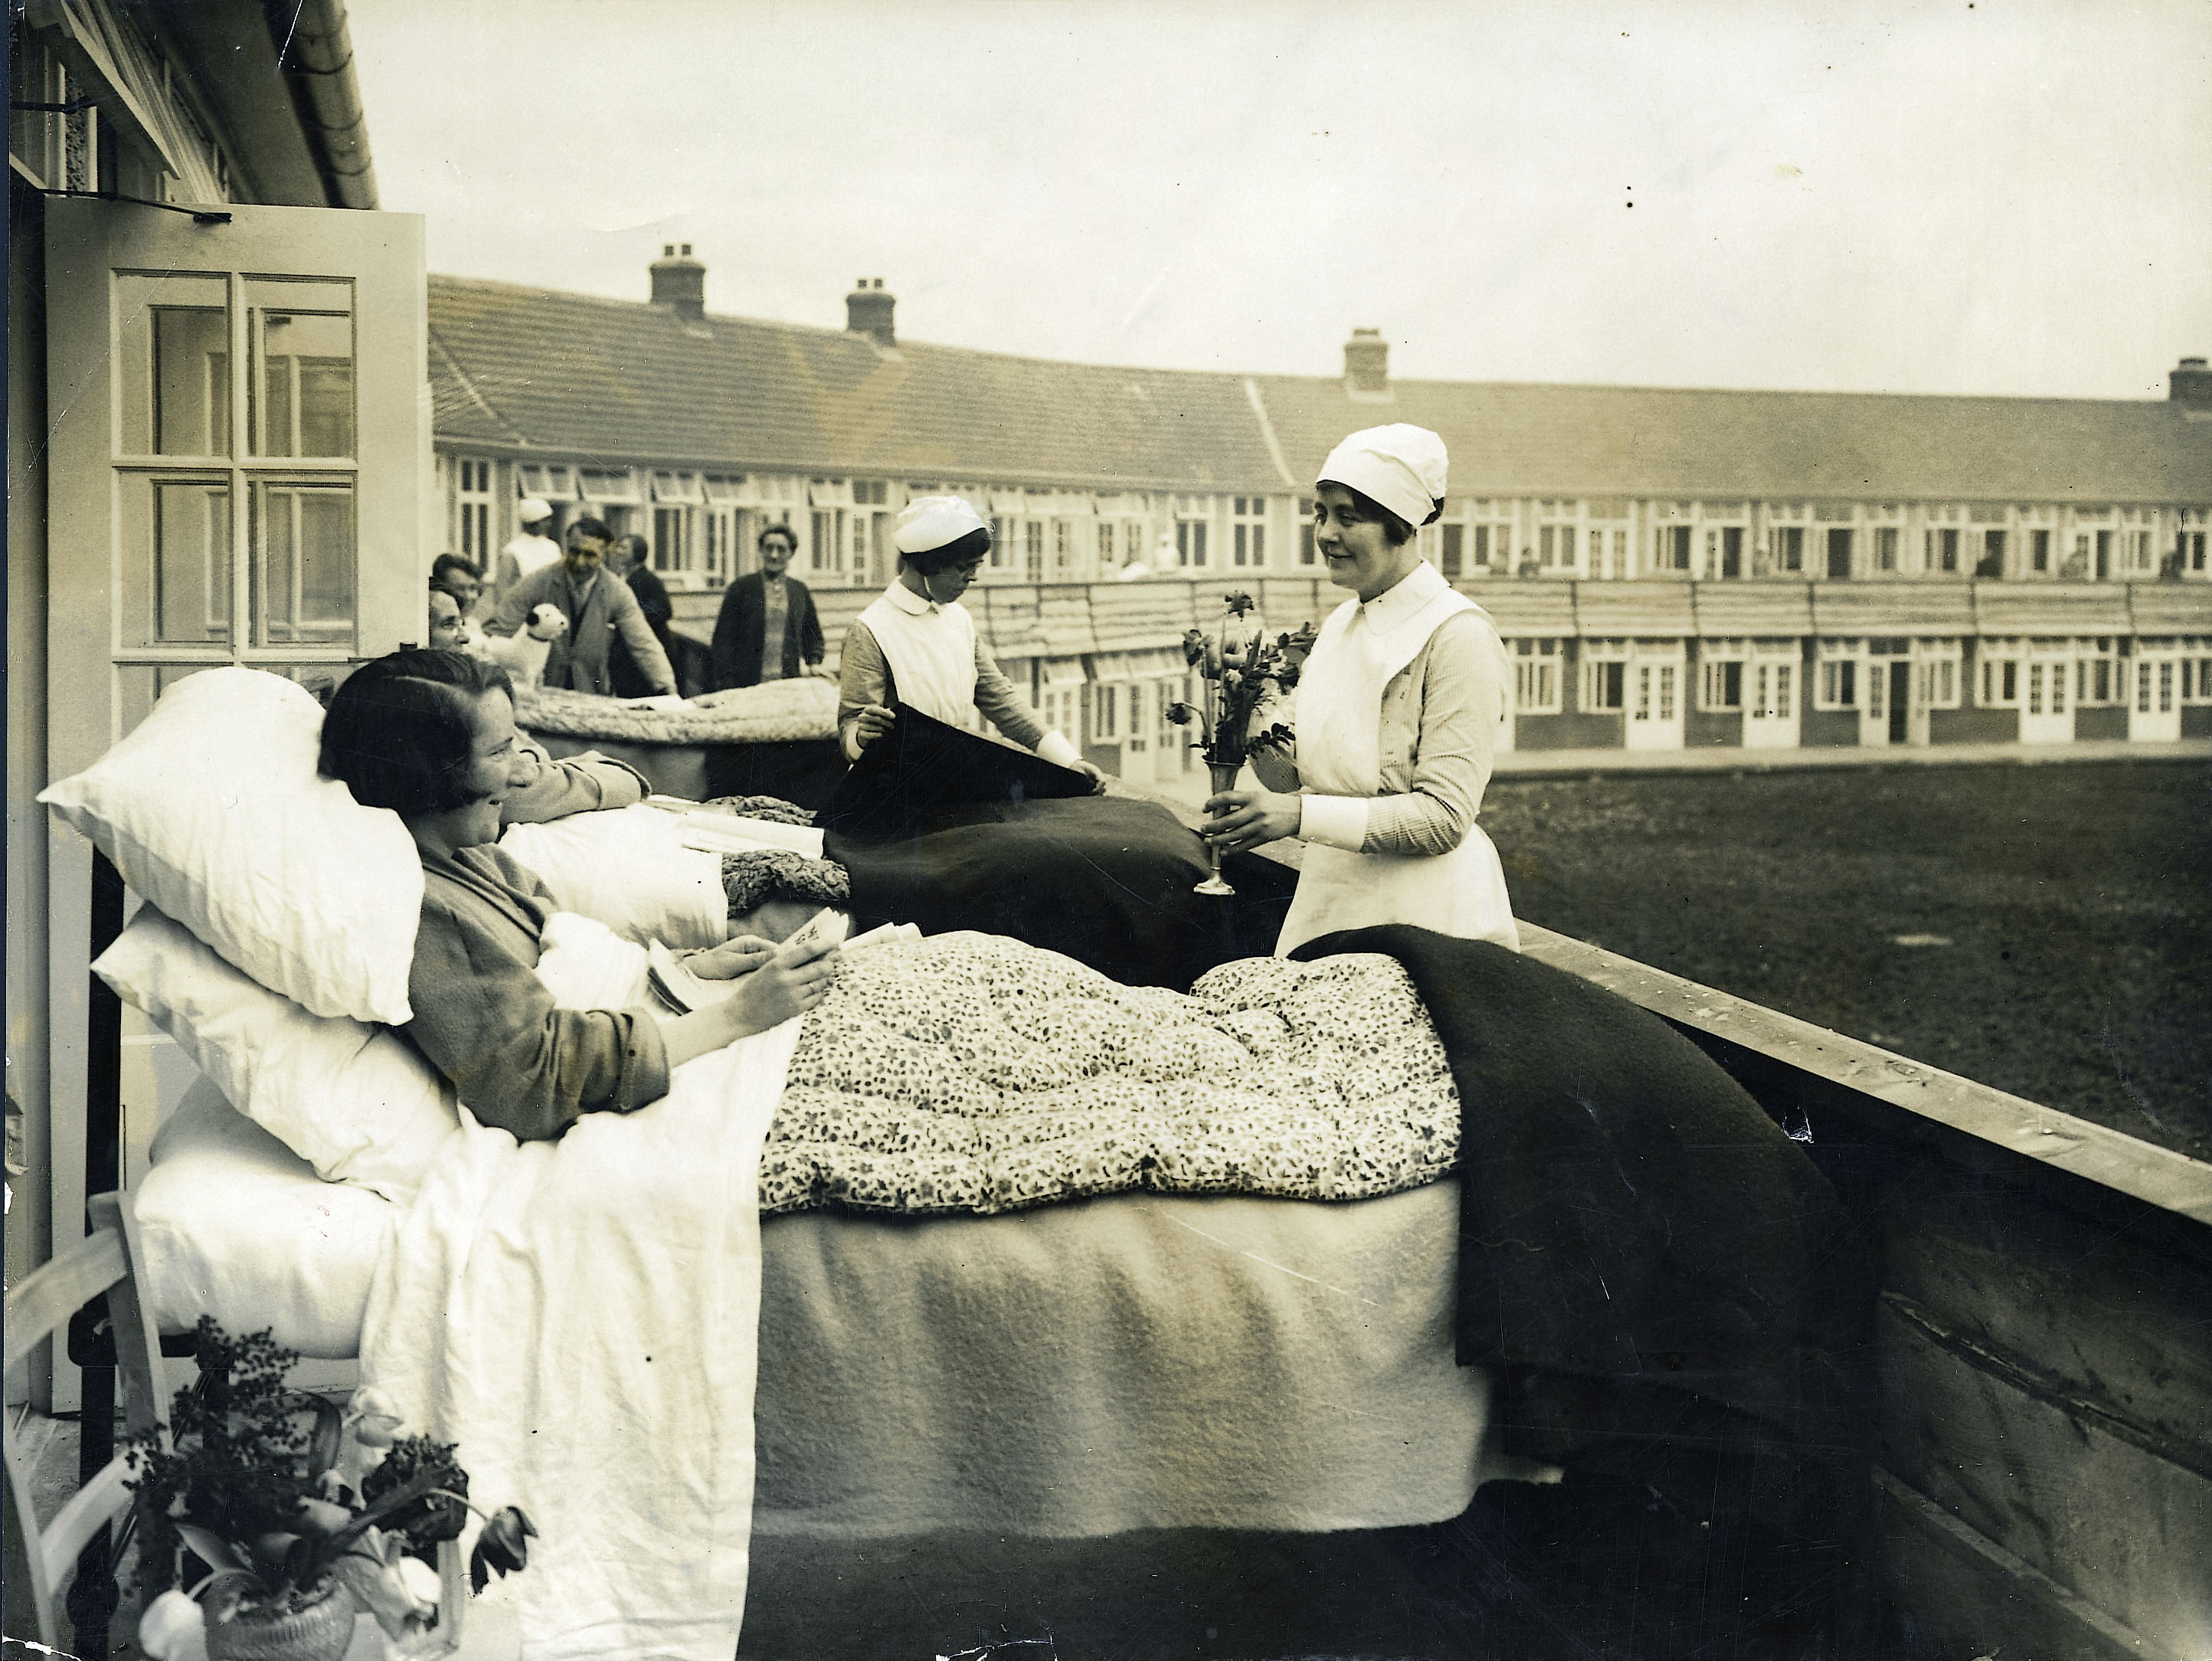 An archive photo of women patients in beds on a balcony.